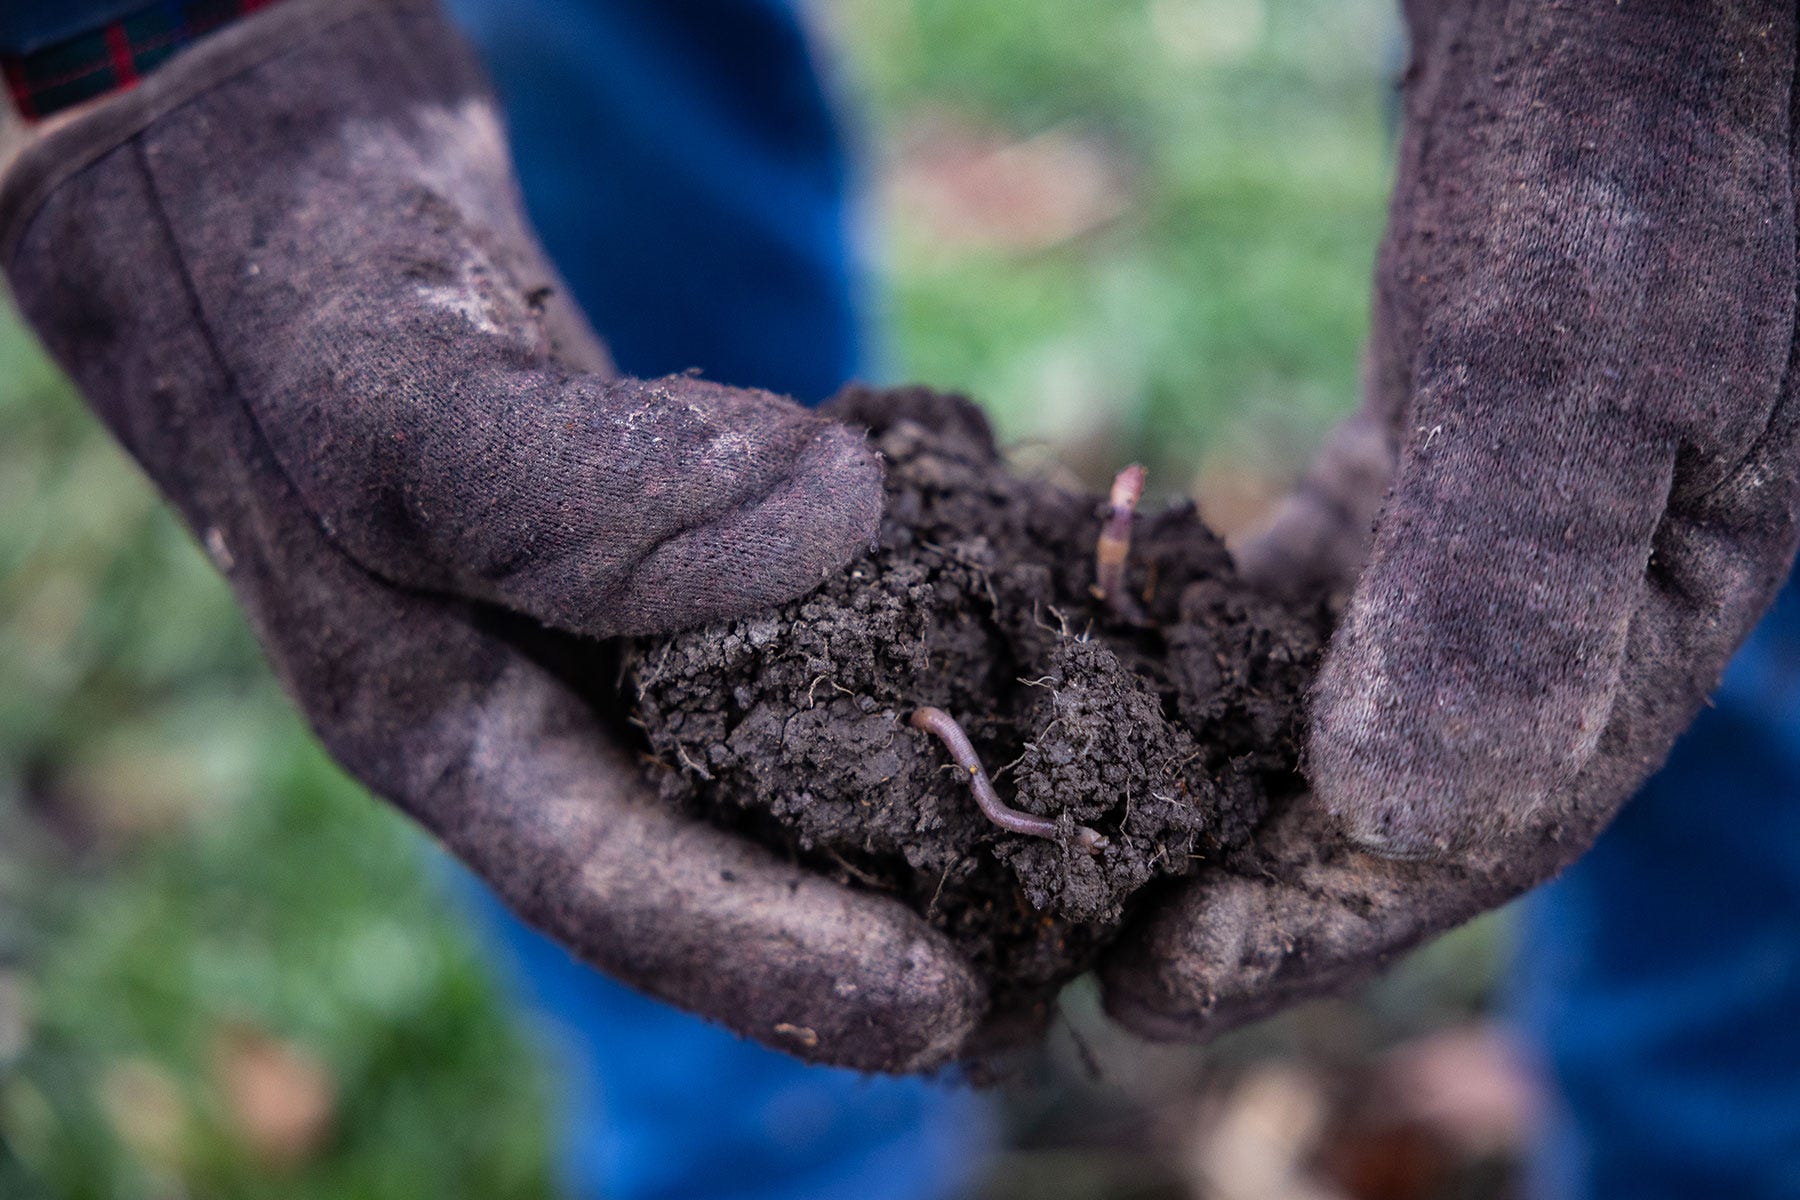 A pair of hands with gloves holding a mound of soil with earthworms